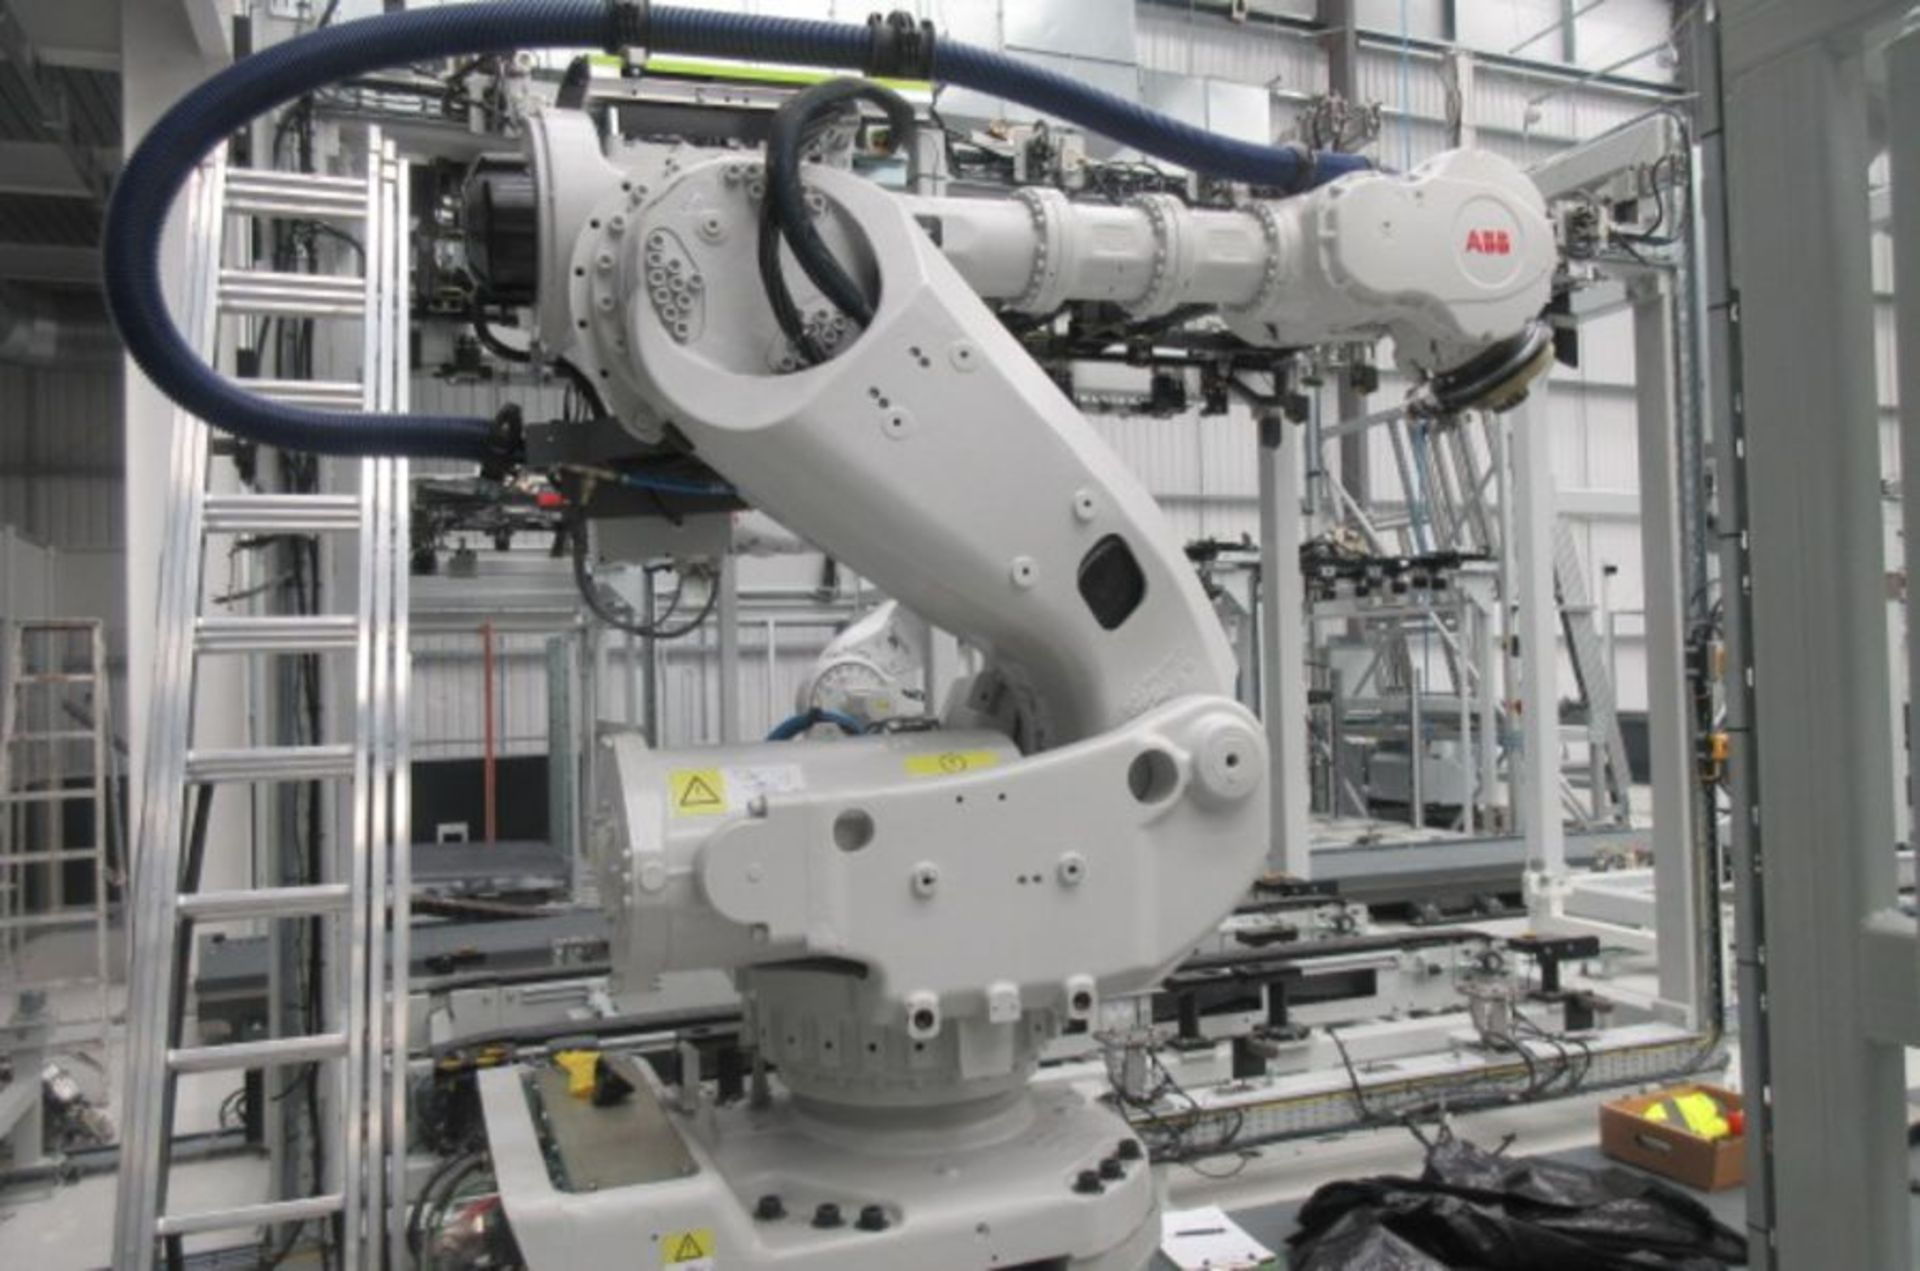 ABB IRB7600-104982 325KG payload 6 axis robot arm (2019) - Image 4 of 6